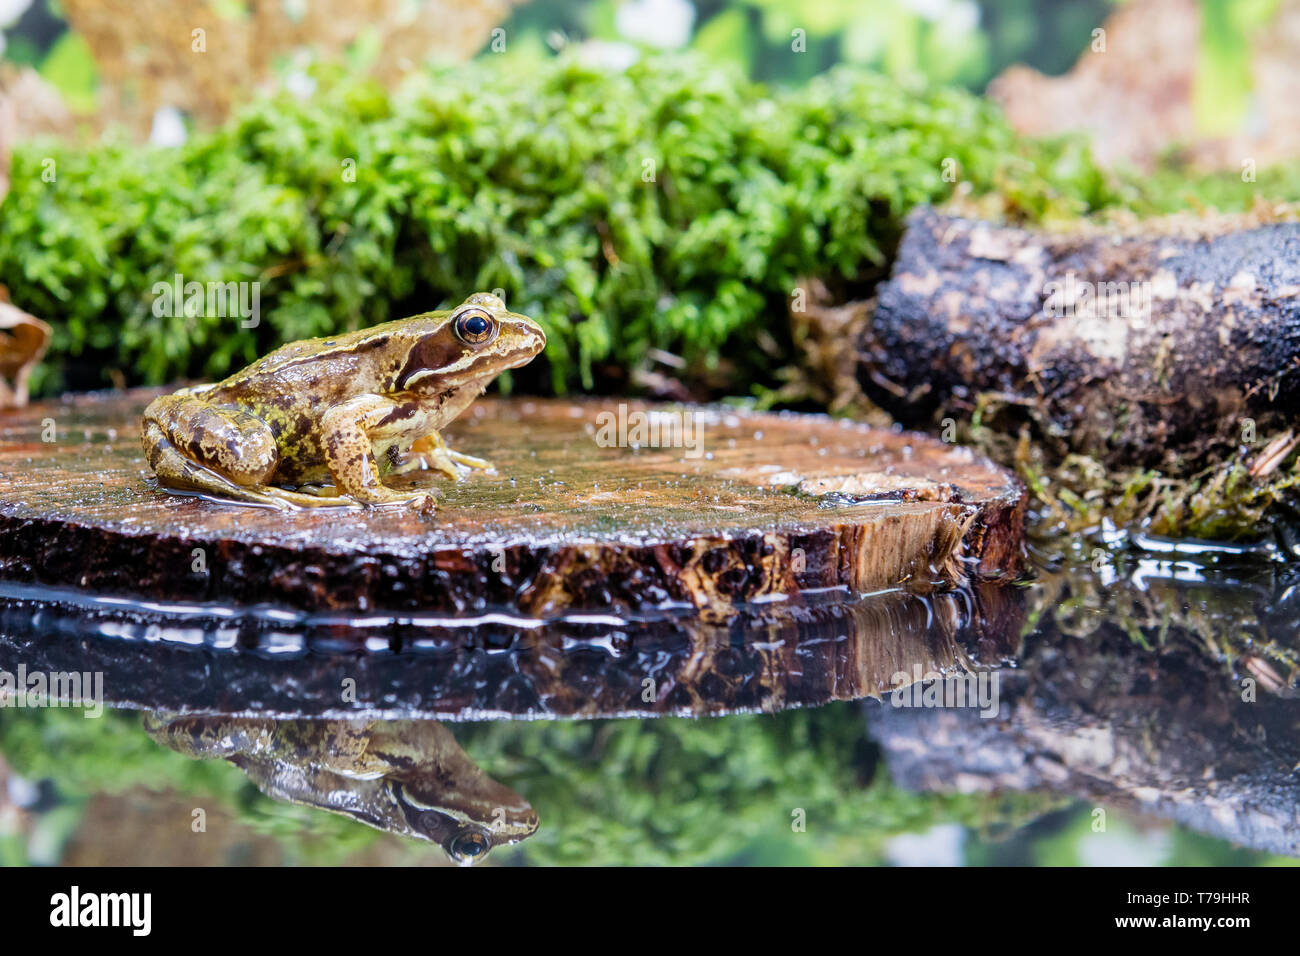 Common frog in Wales in springtime, Photographed in a controlled environment and then returned to where it was found. Stock Photo